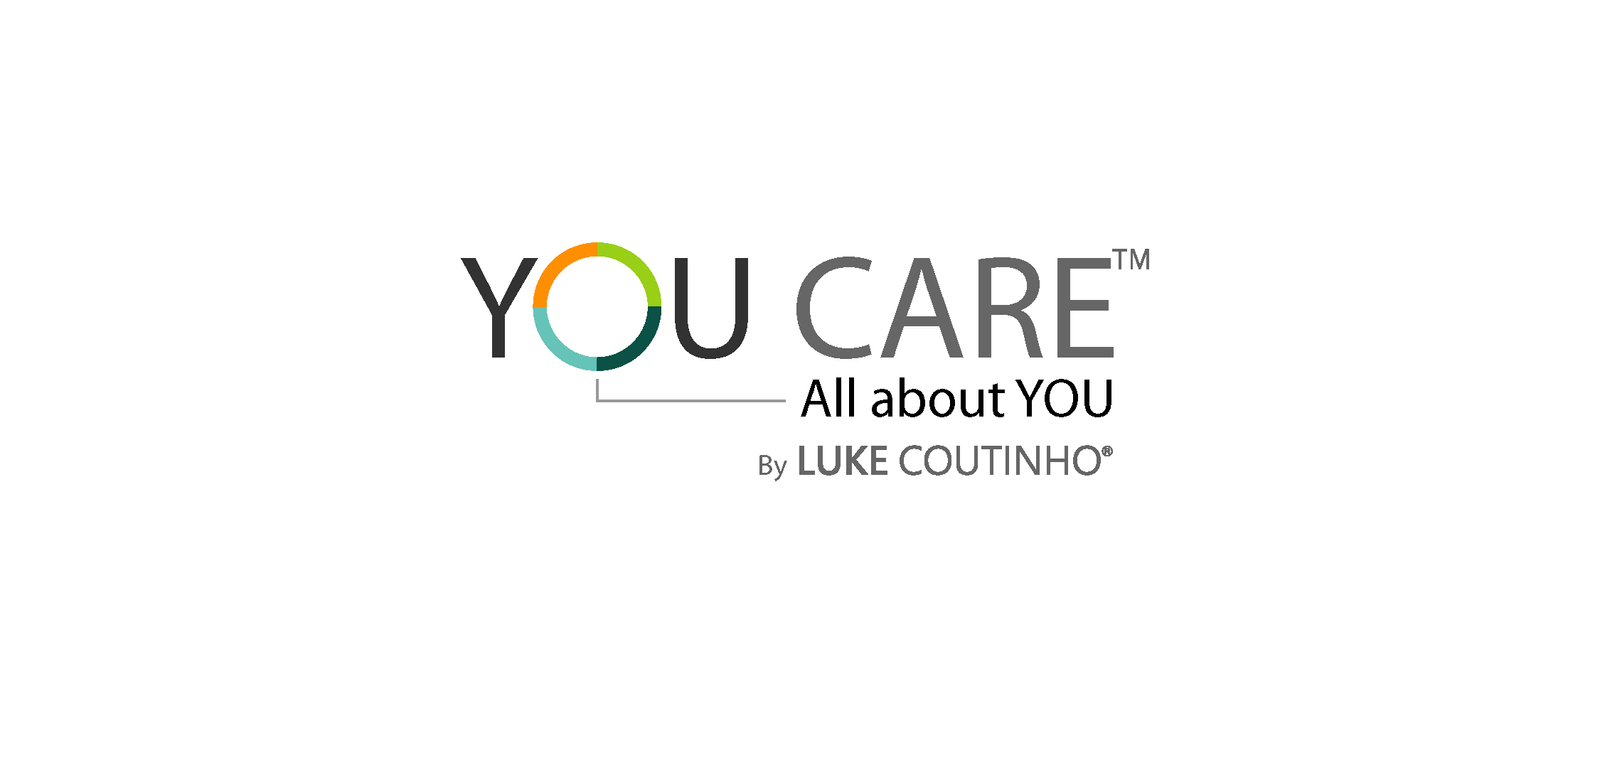 Logo - YouCare - All about YOU by Luke Coutinho